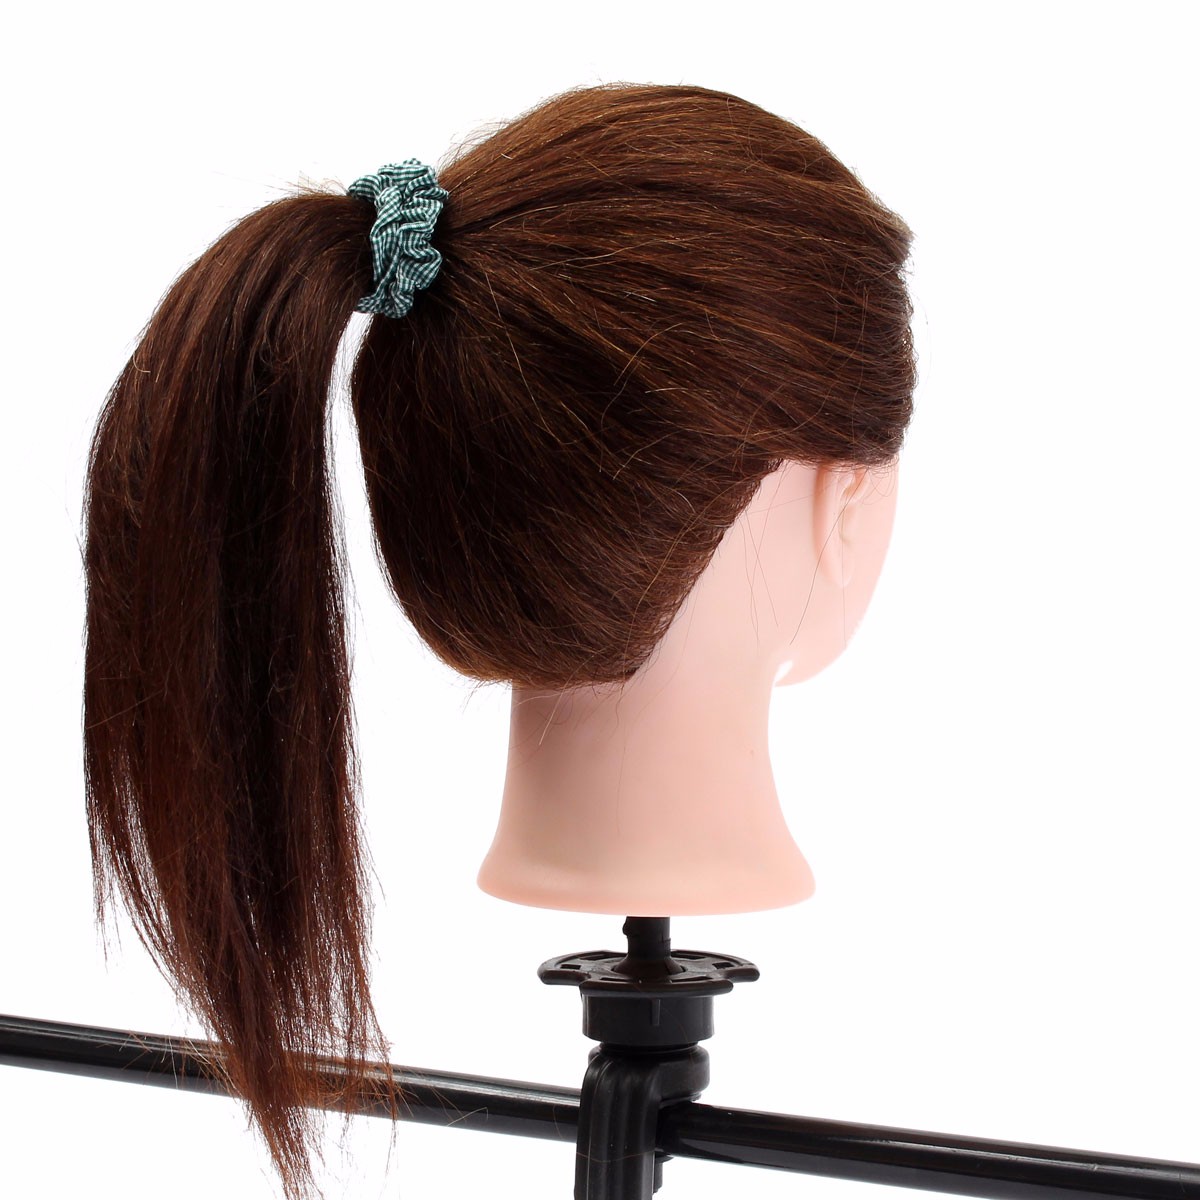 20quot-Brown-90-Human-Hair-Hairdressing-Training-Head-Mannequin-Model-Braiding-Practice-Salon-Clamp-1111877